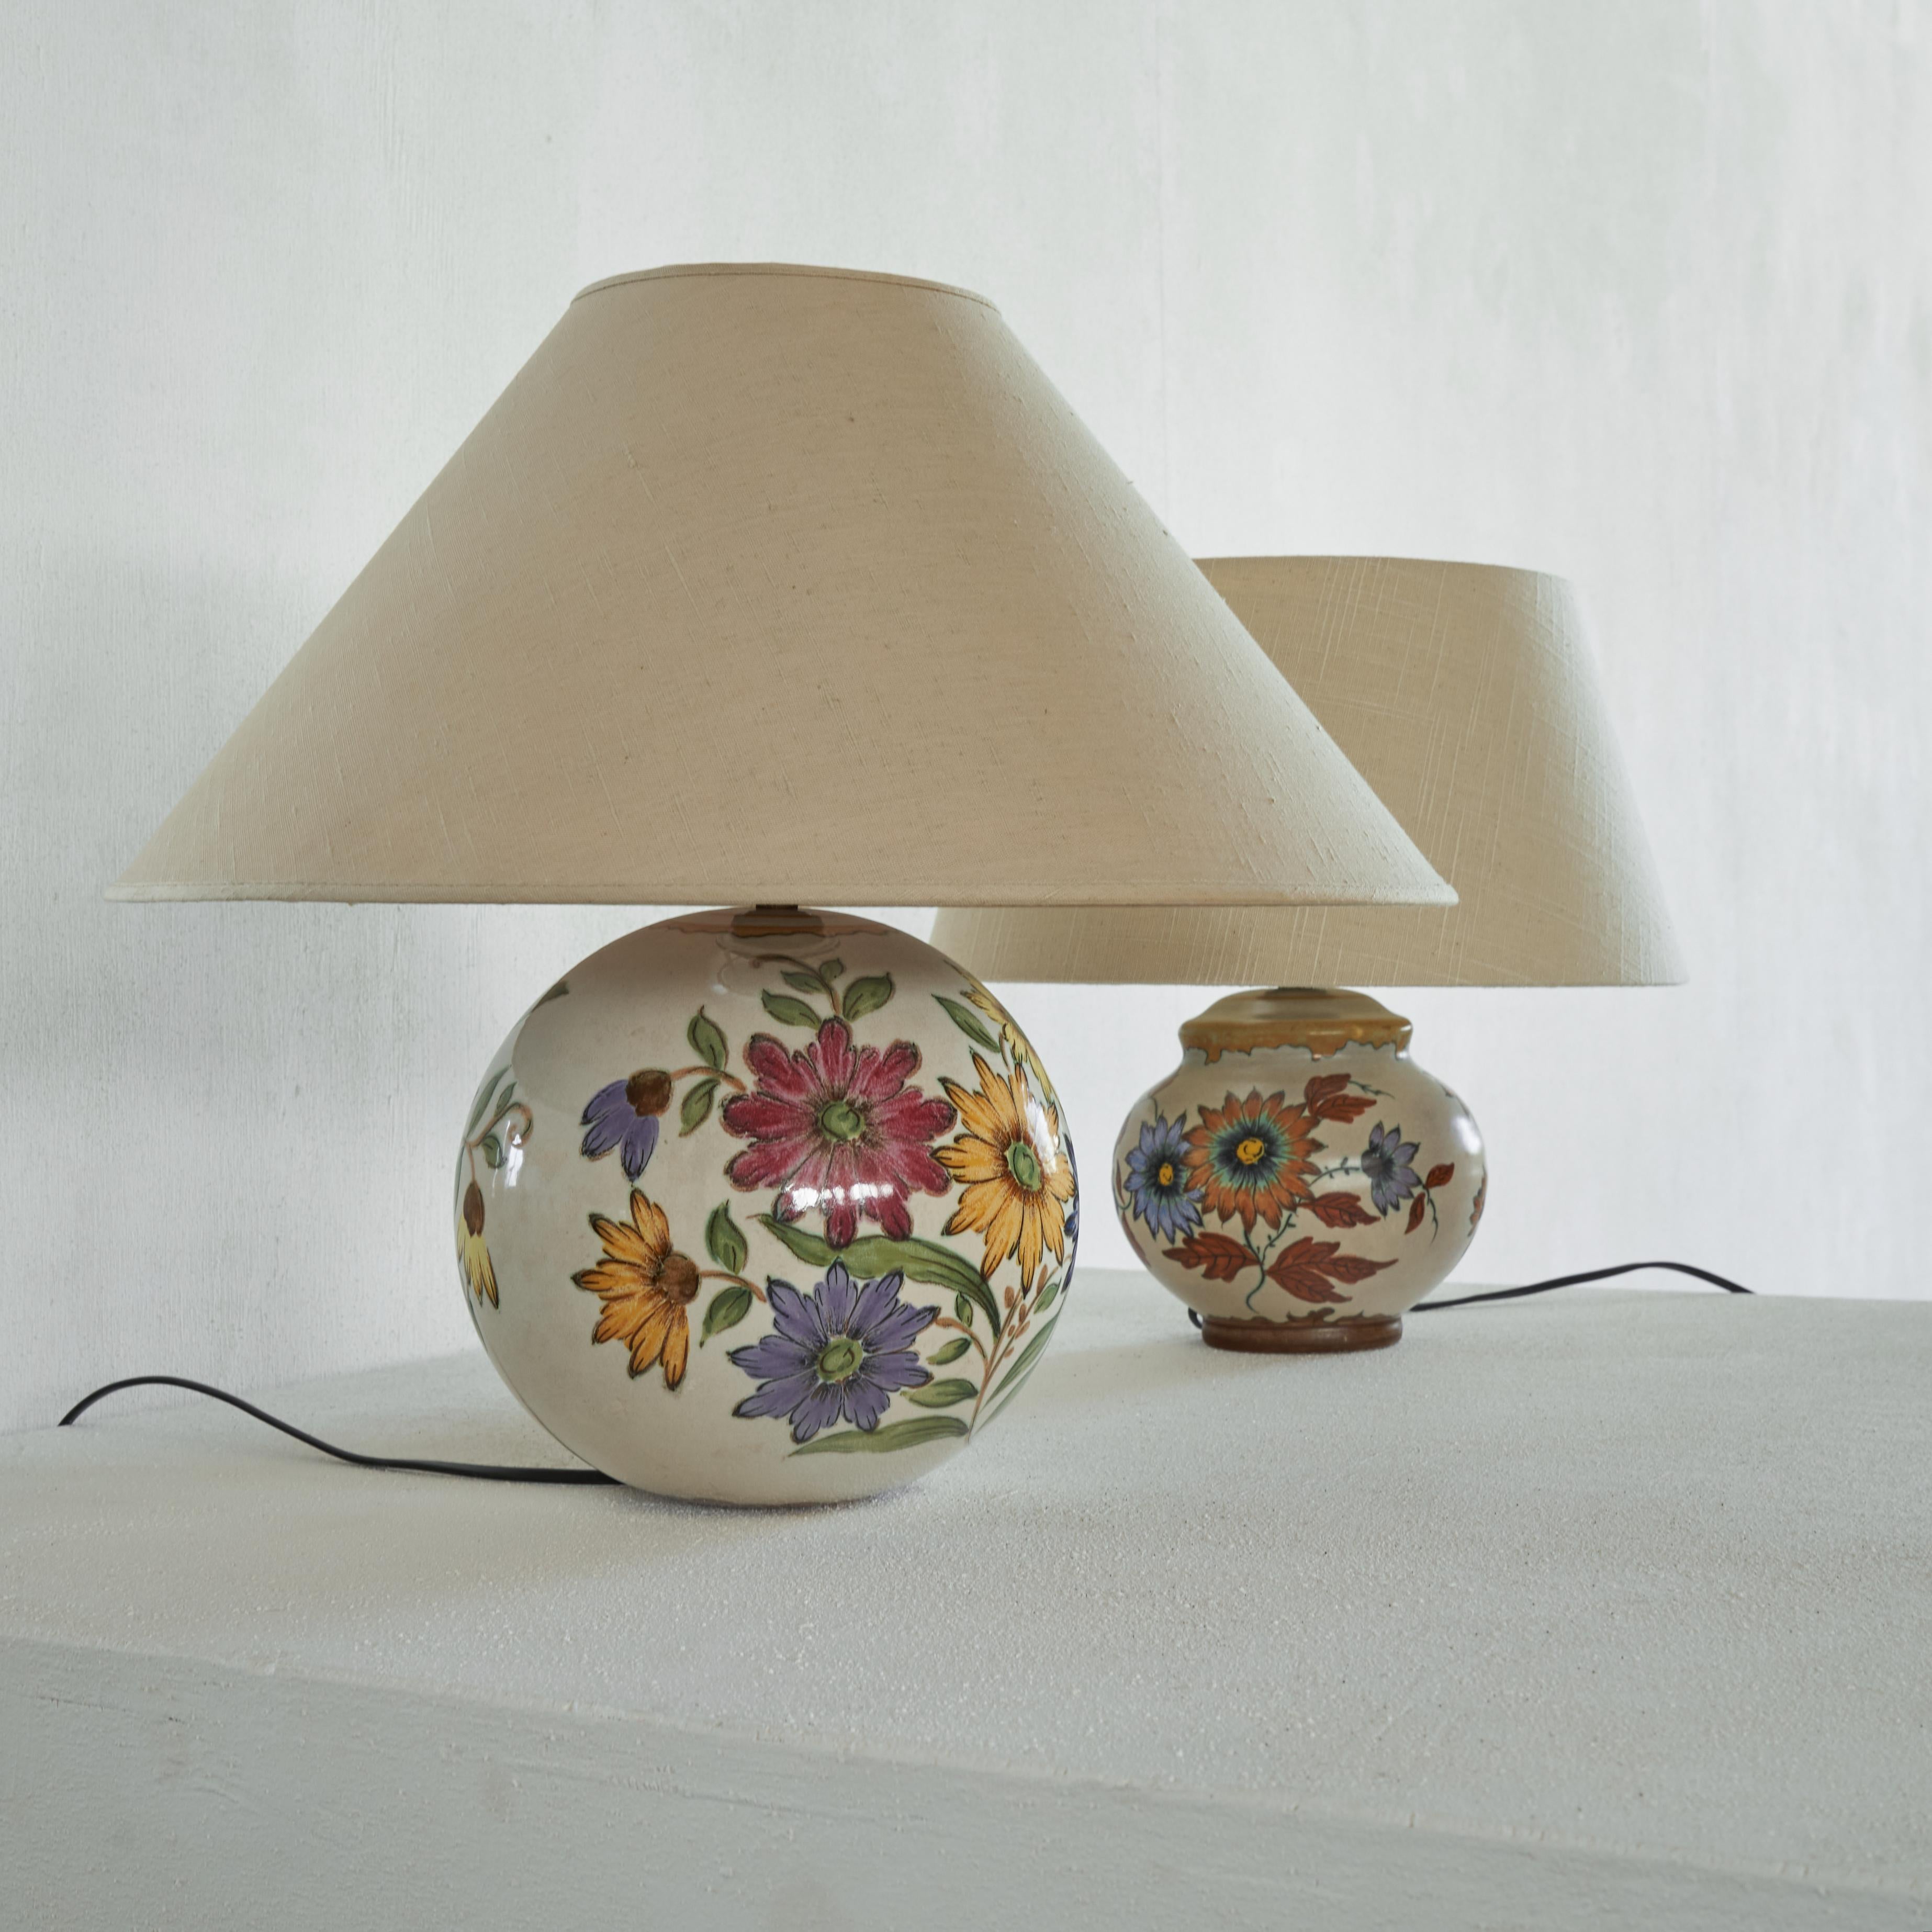 Hand-Crafted Pair of Wonderful Dutch Ceramic Table Lamps with Floral Decor 1930s